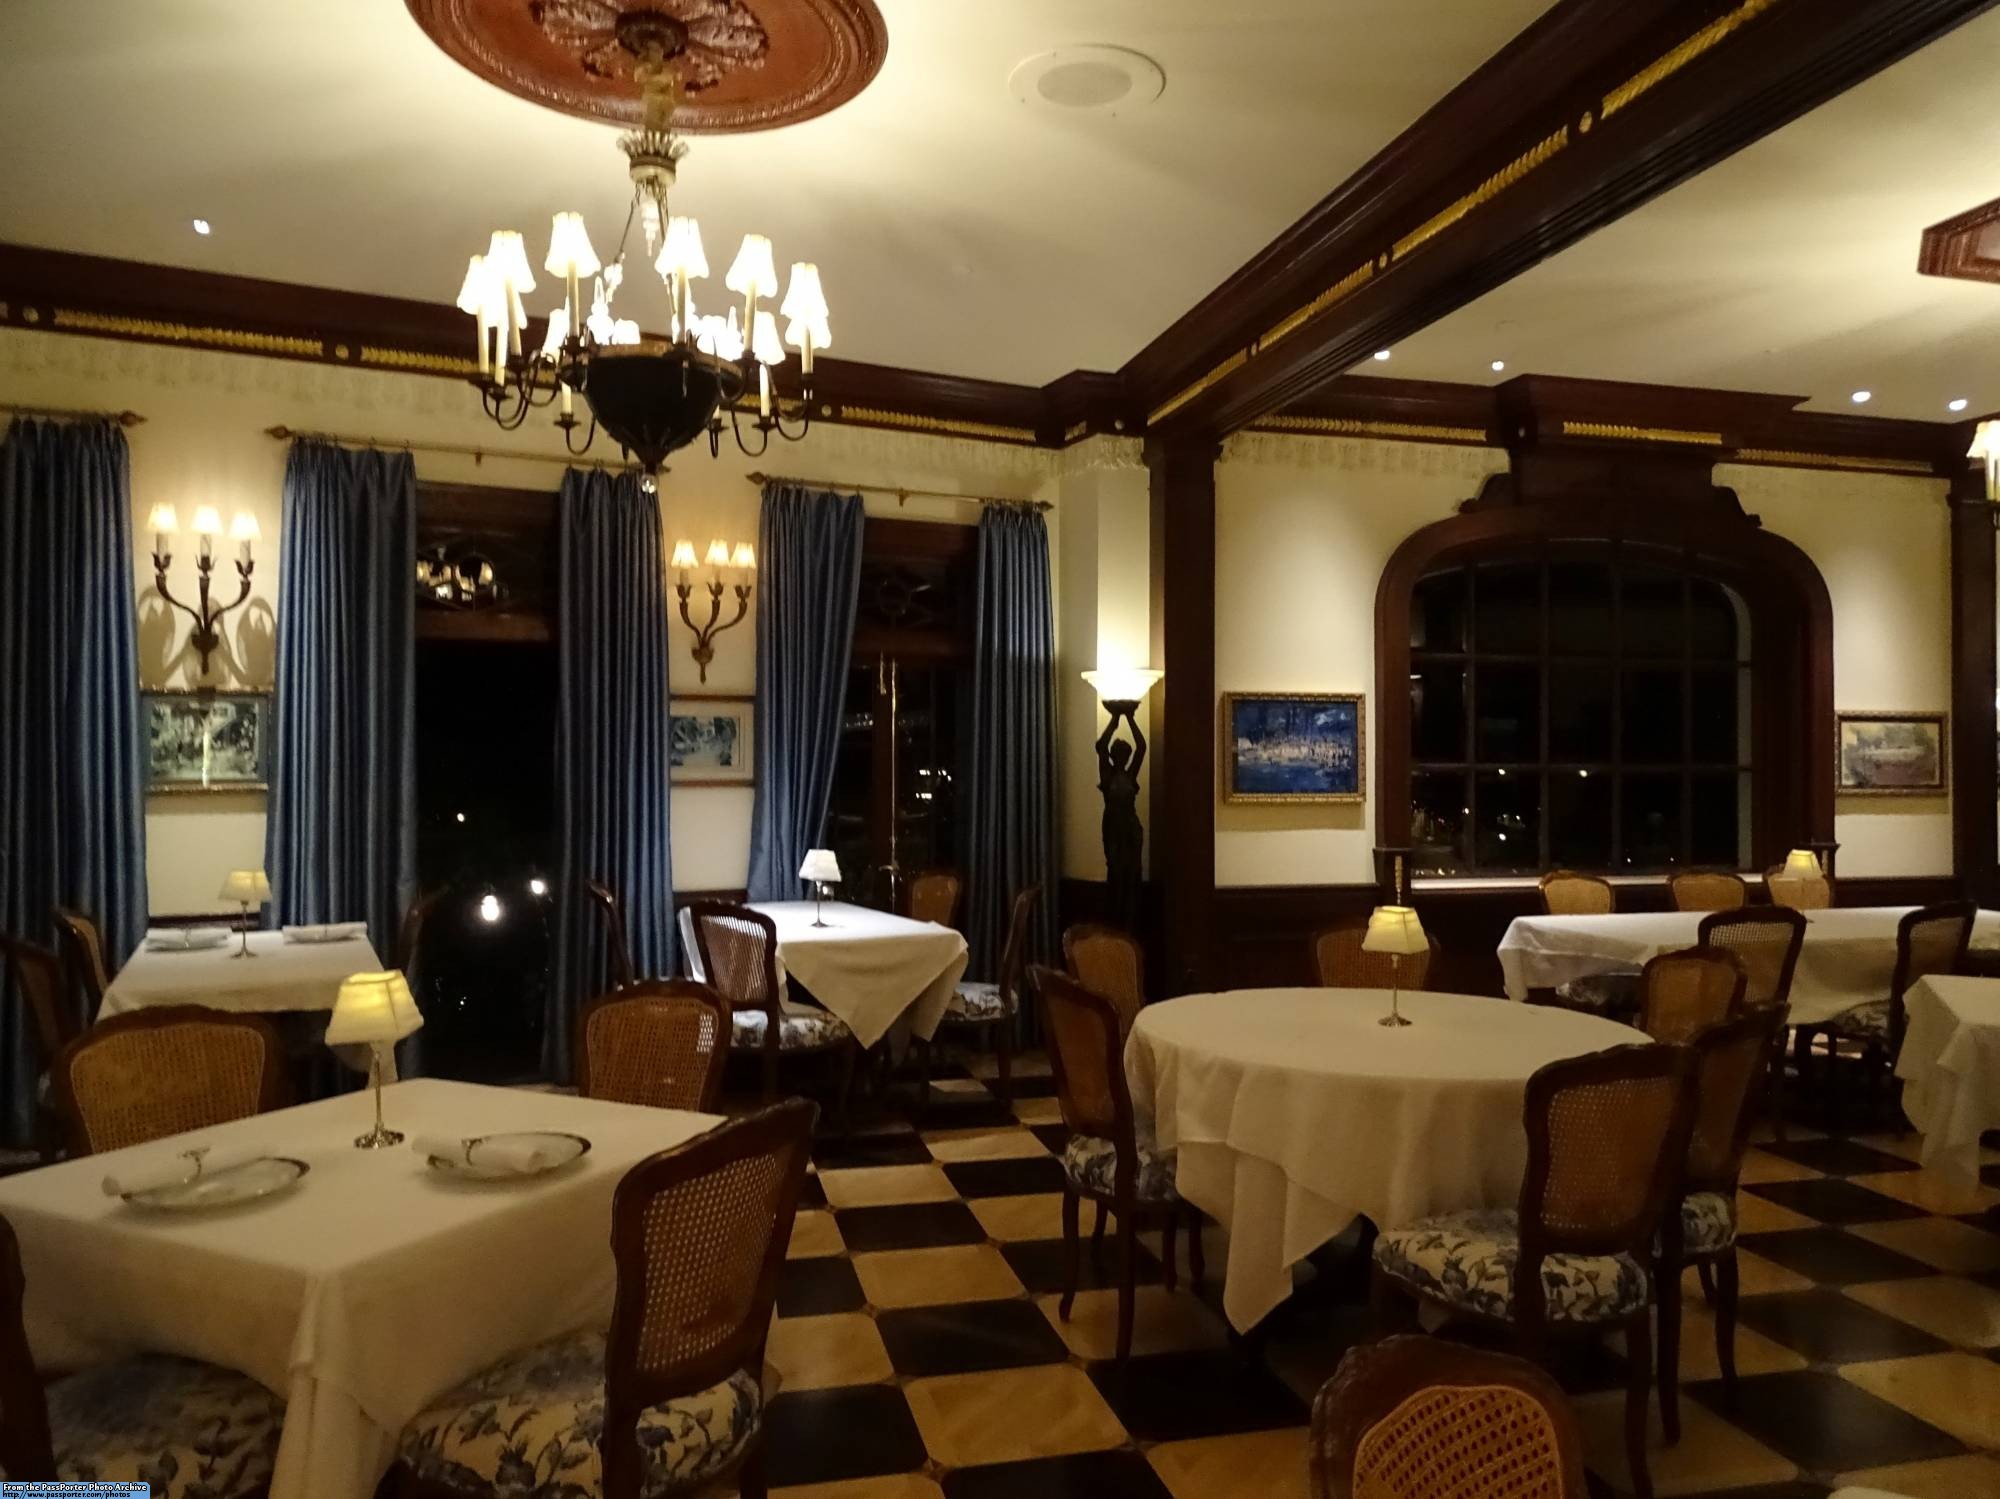 Get a peek into the exclusive private Club 33 at Disneyland | PassPorter.com